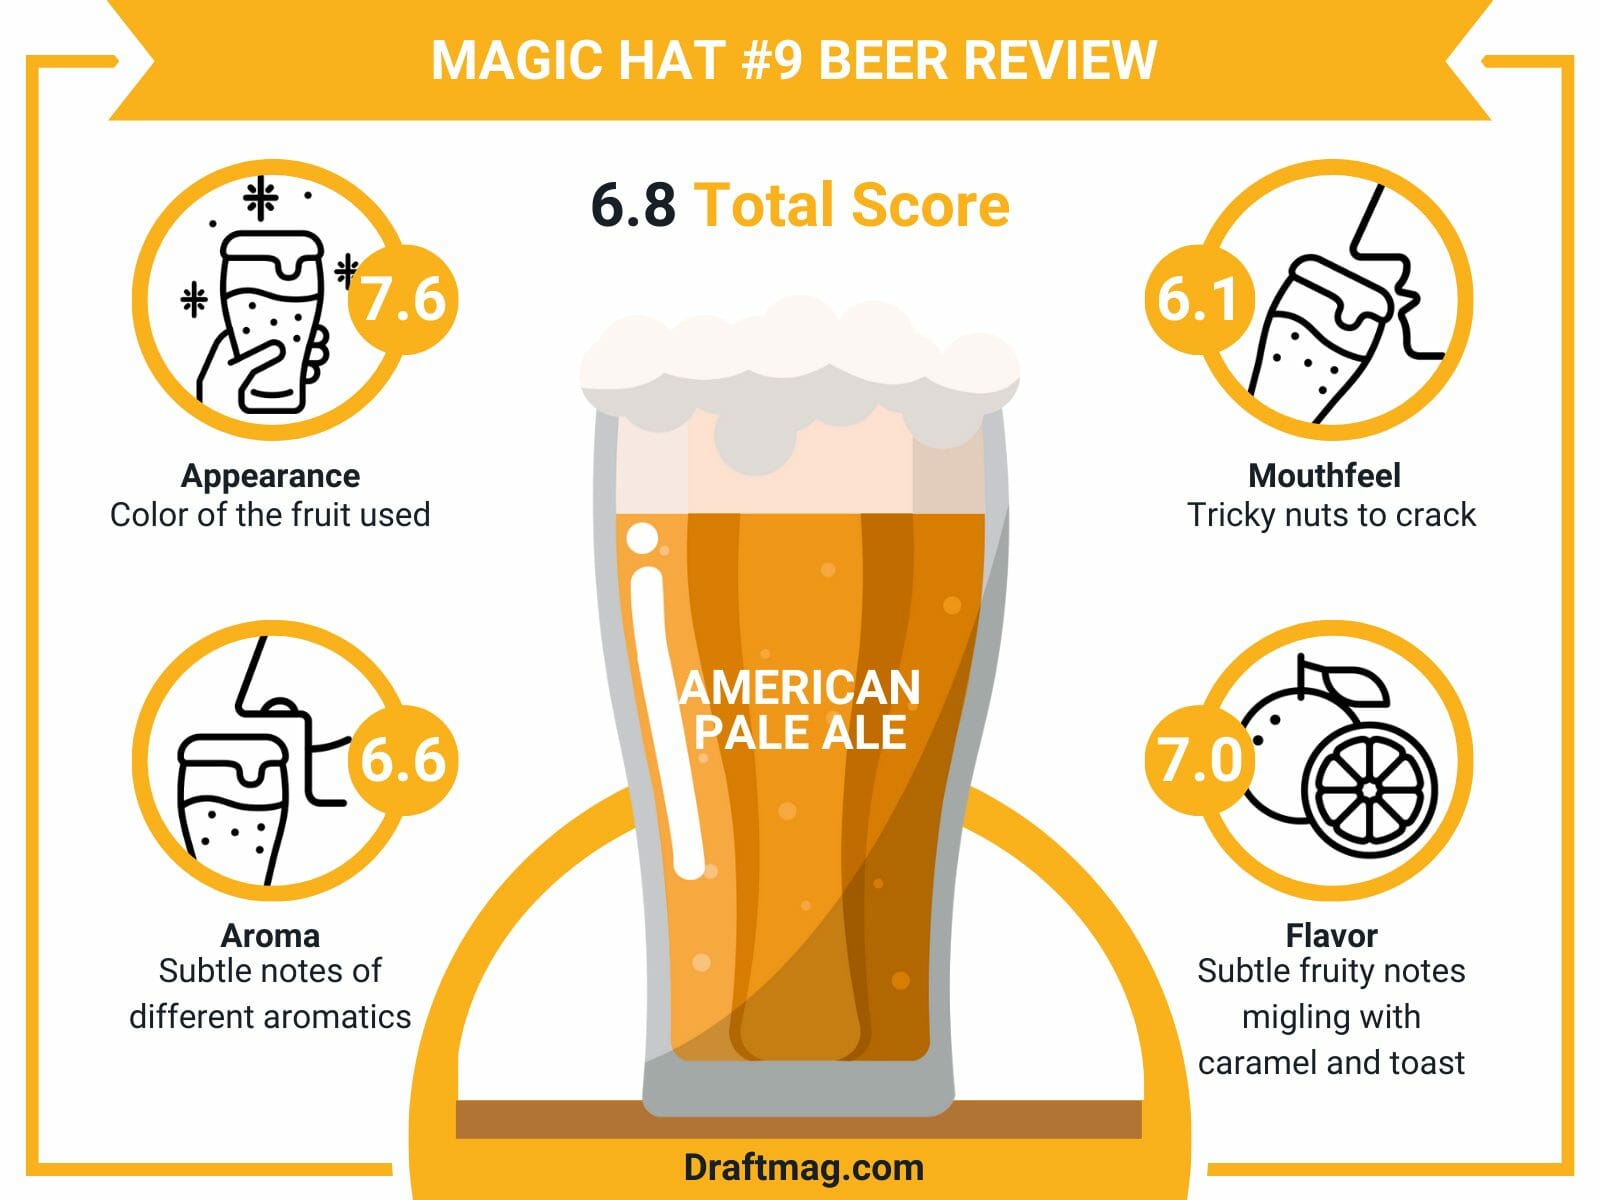 Magic hat beer review infographic